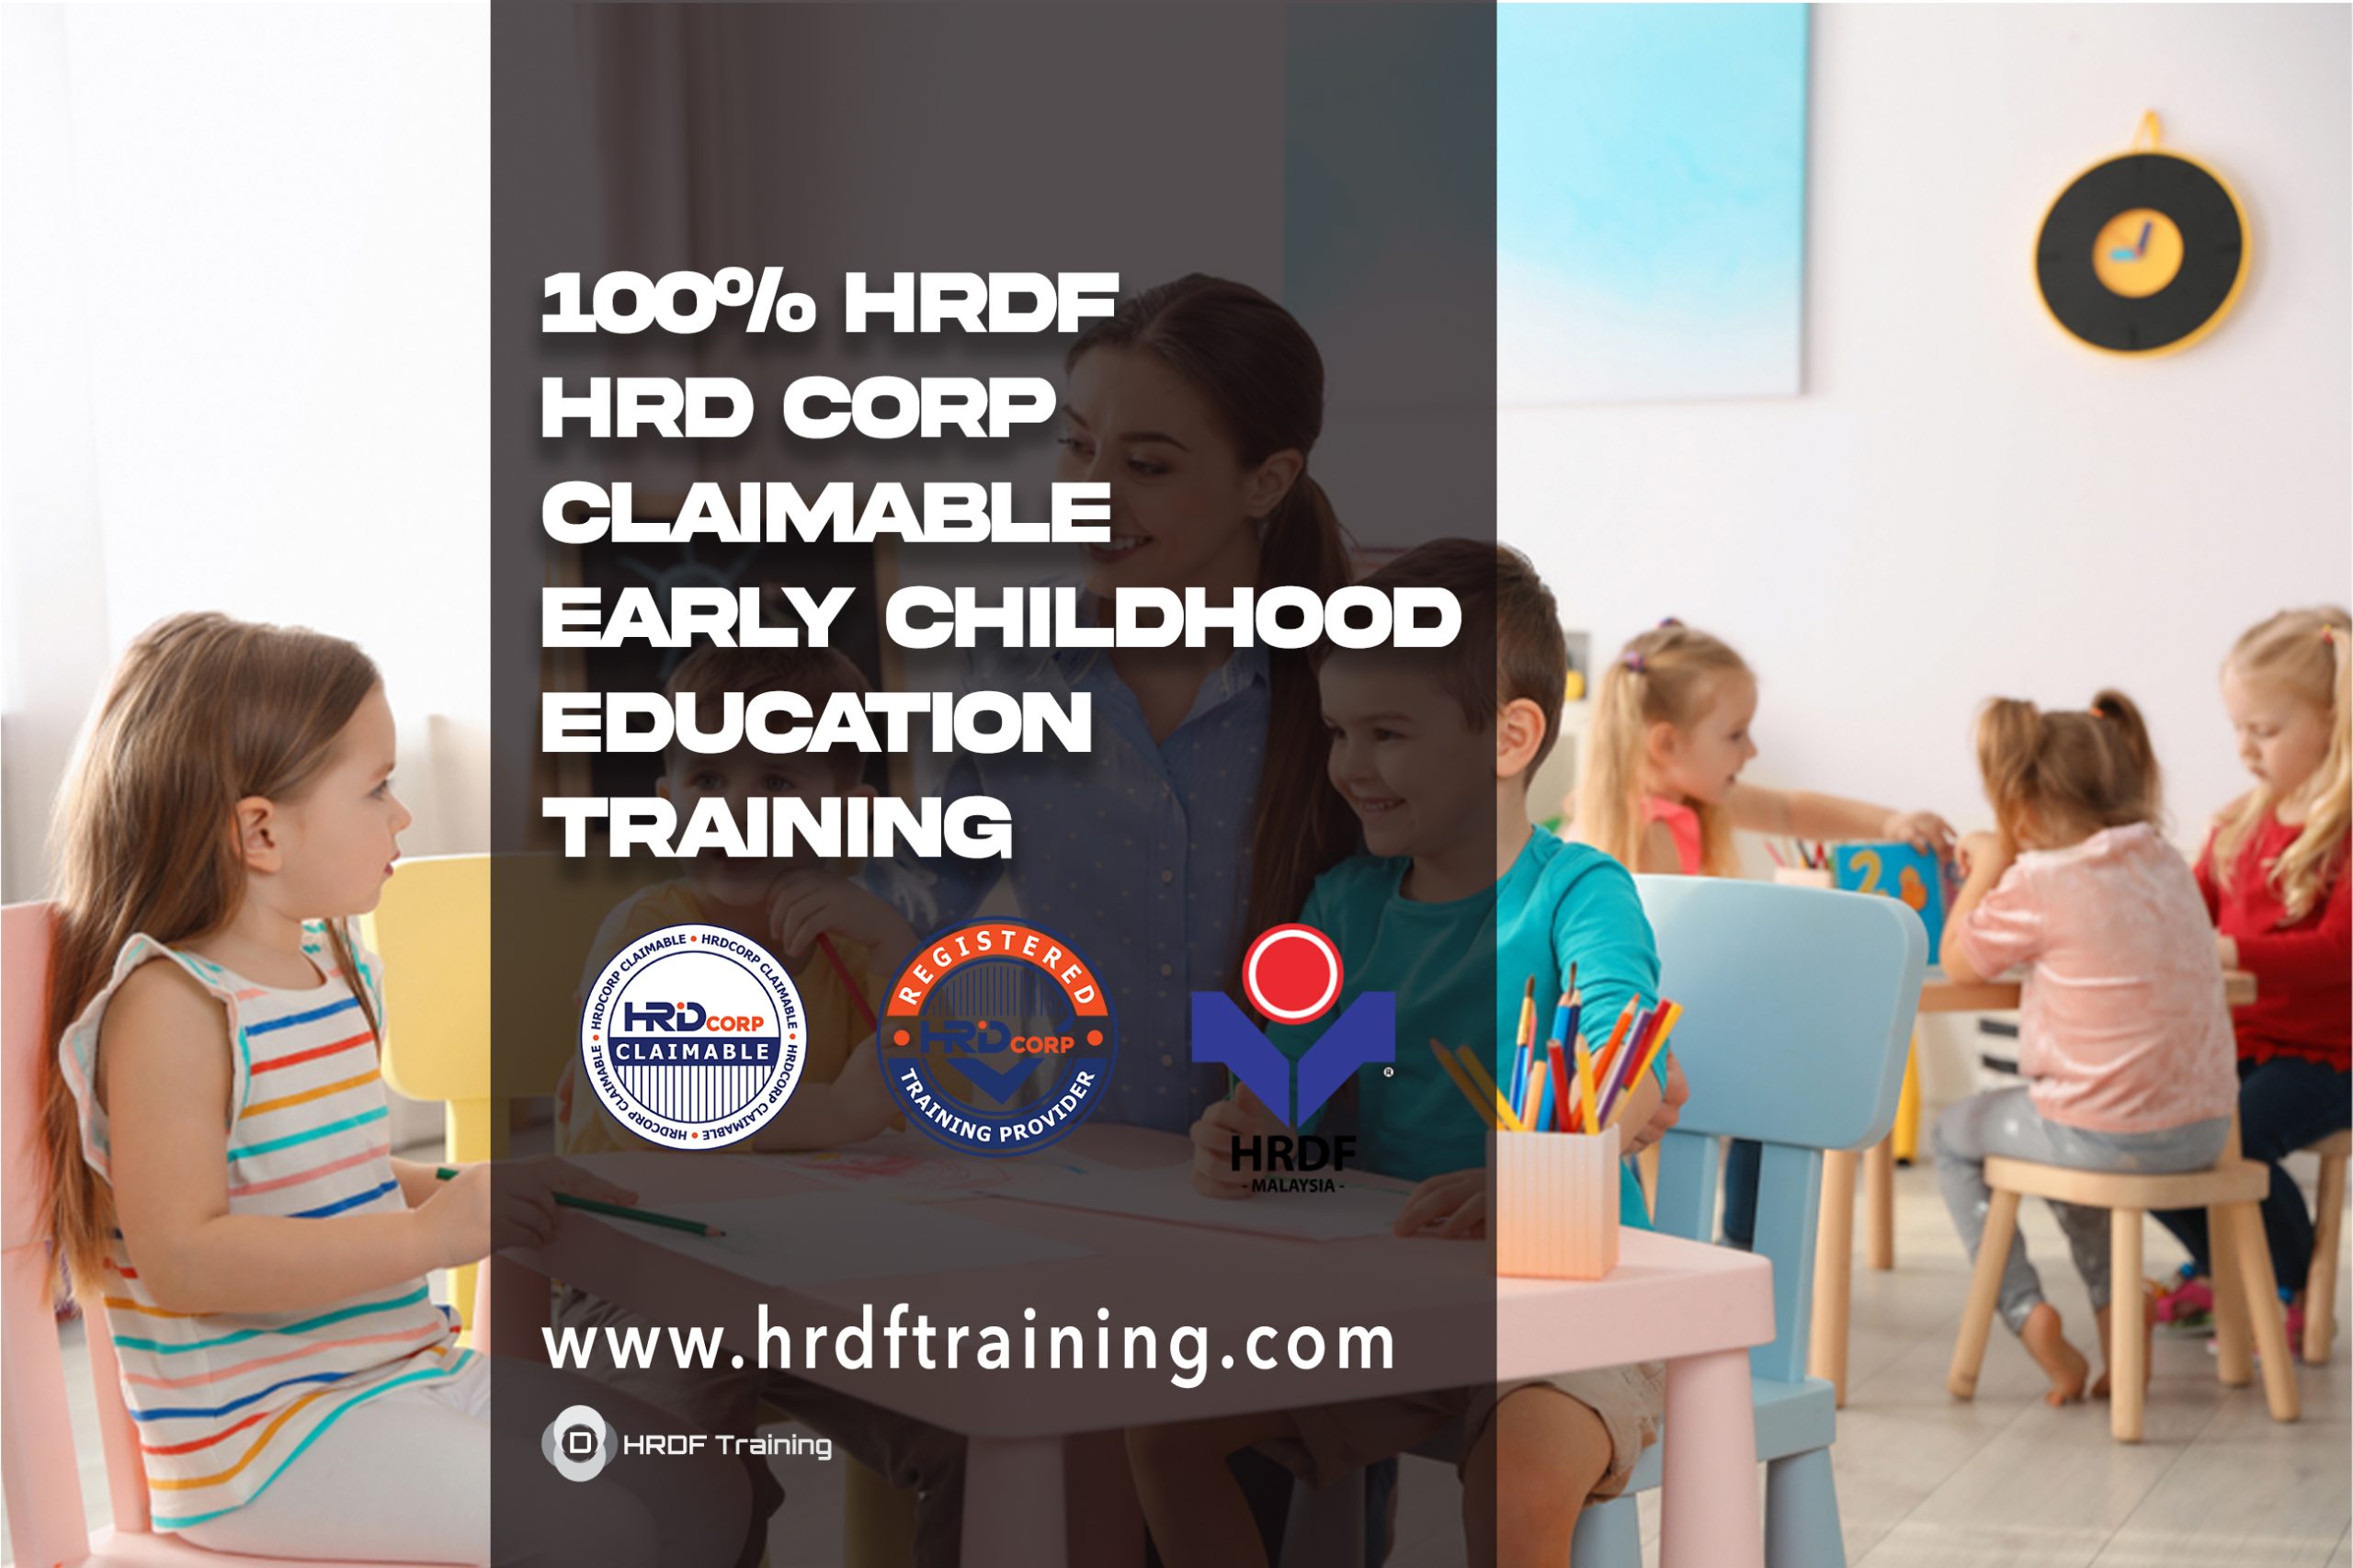 HRDF HRD Corp Claimable Early Childhood Education Training